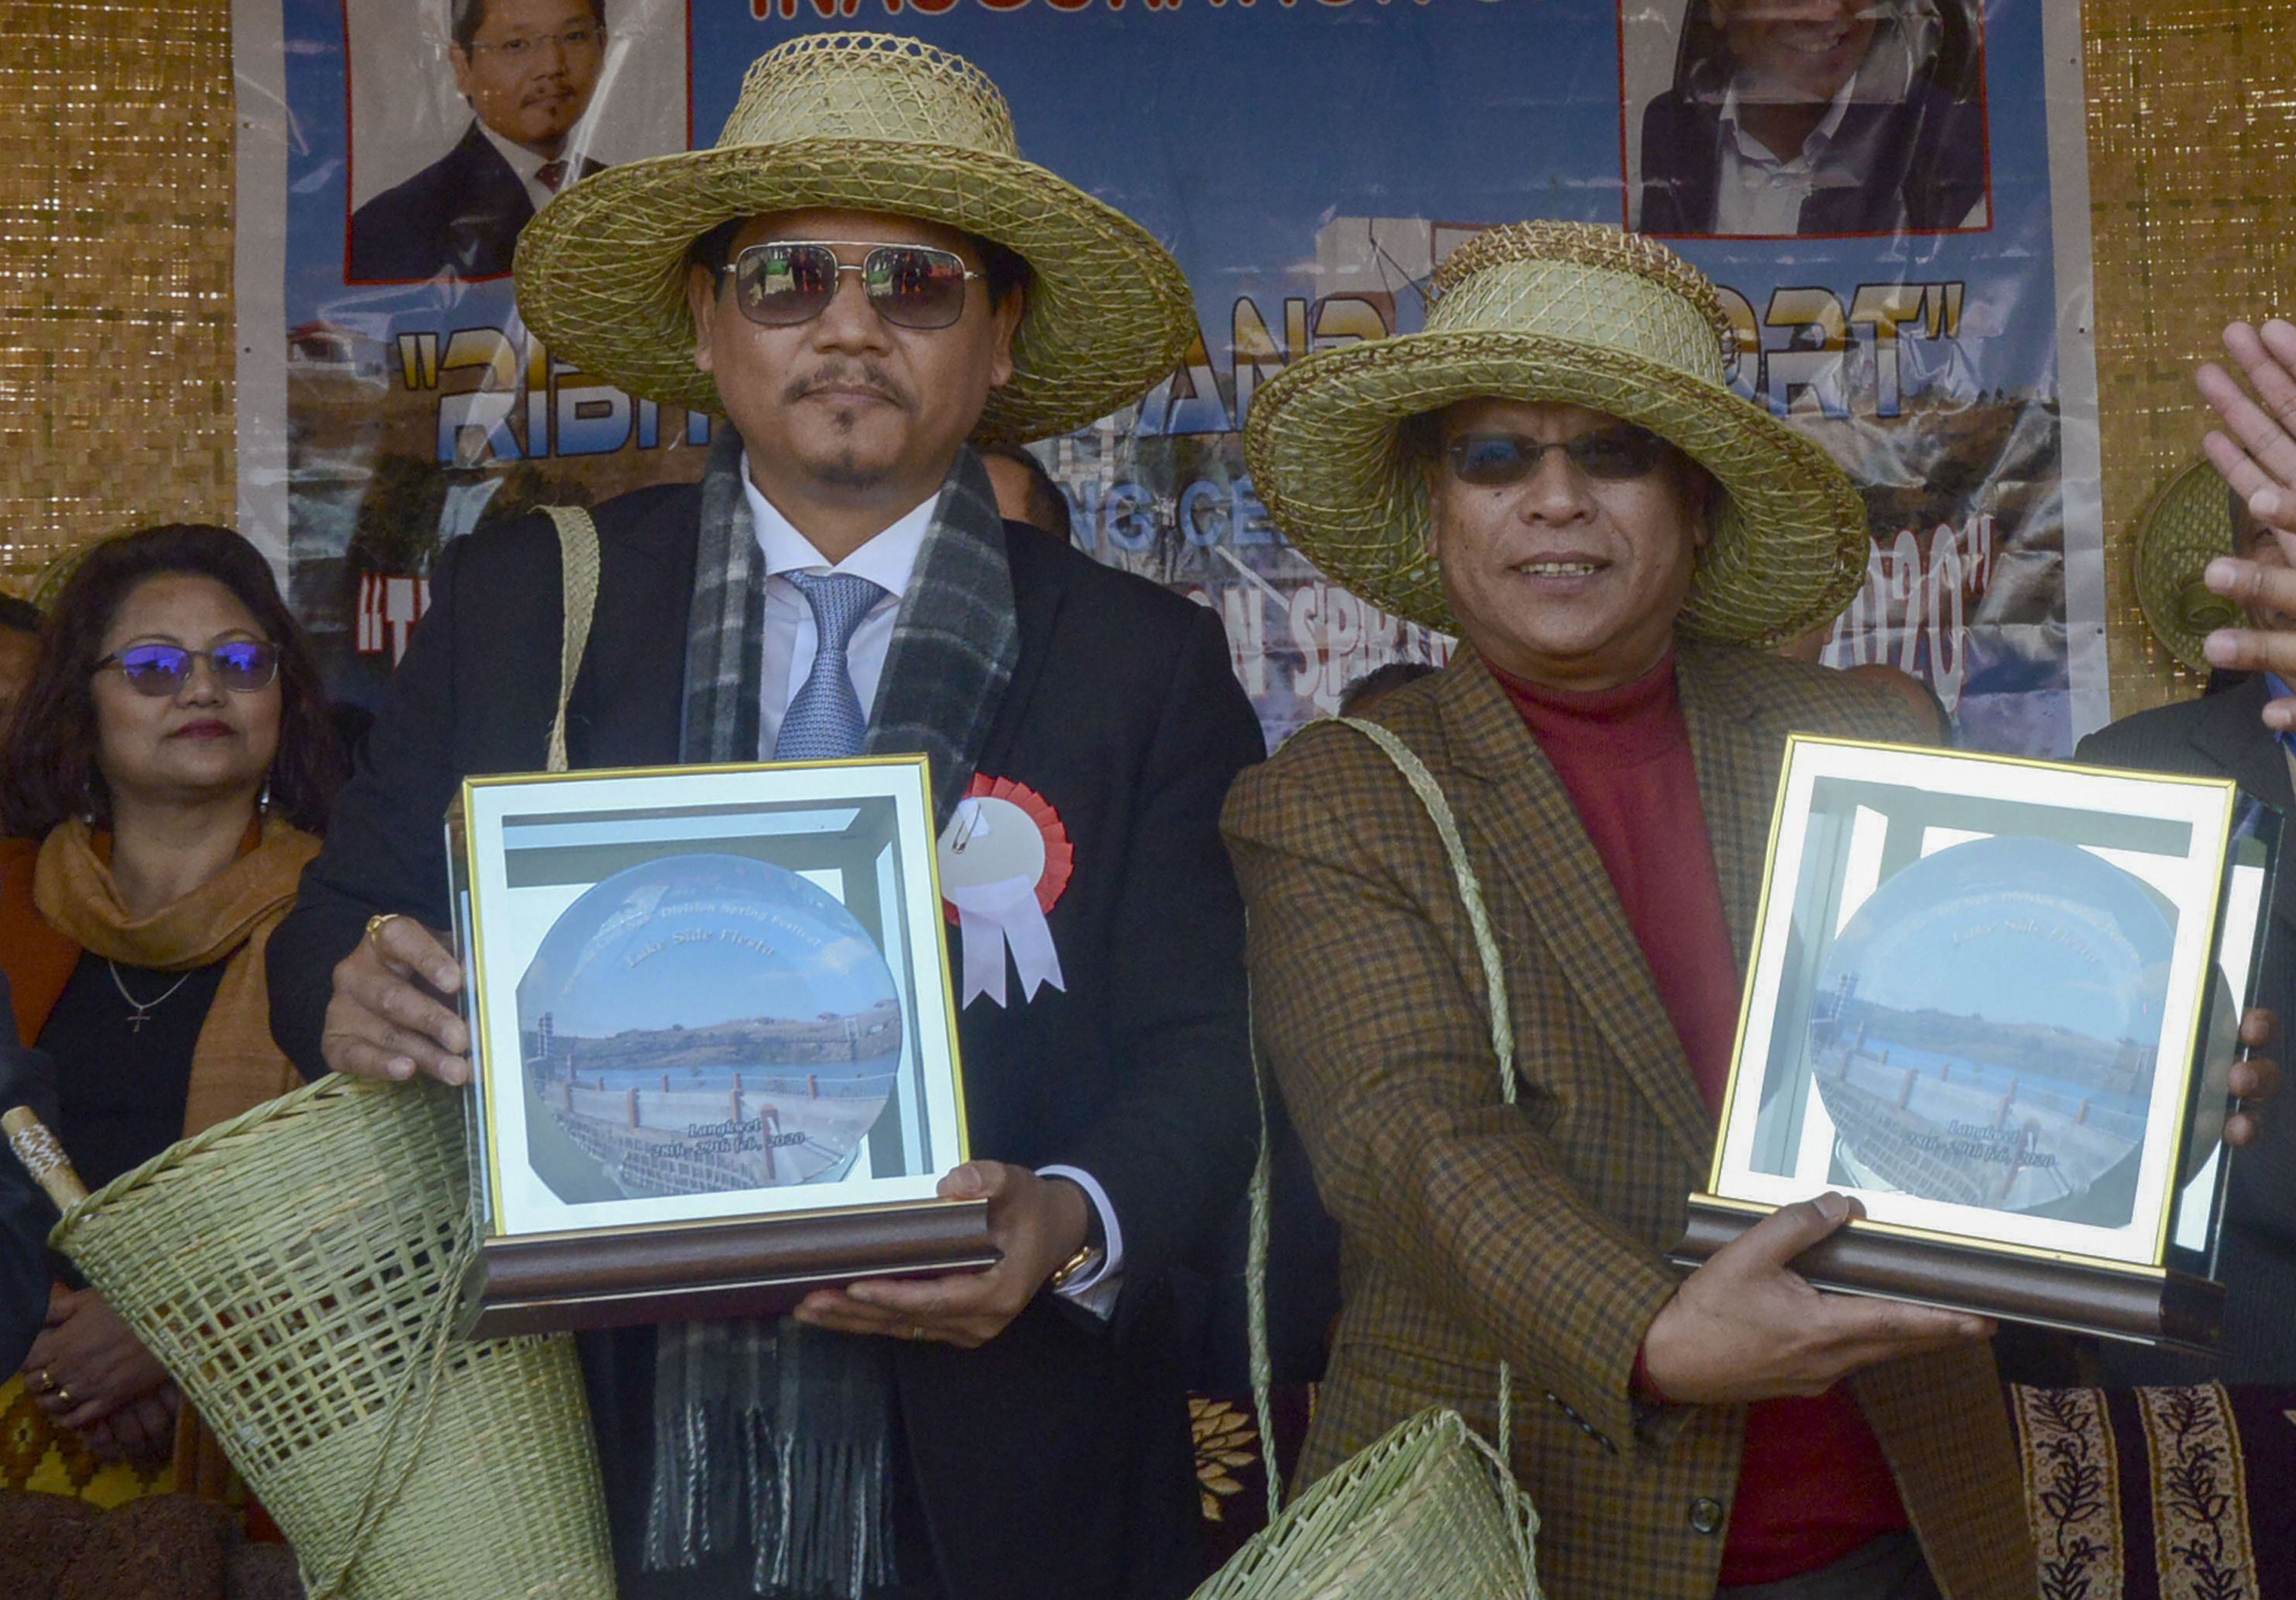 Meghalaya Chief Minister Conrad K. Sangma and Deputy Chief Minister Prestone Tynsong being felicitated during inauguration of Ribbit Lake Resort on the occasion of ‘Spring Festival 2020-Lakeside Fiesta’ organised jointly by the department of tourism, civil administration and Raid Nongkhlieng, at Langkawet in East Khasi Hills district